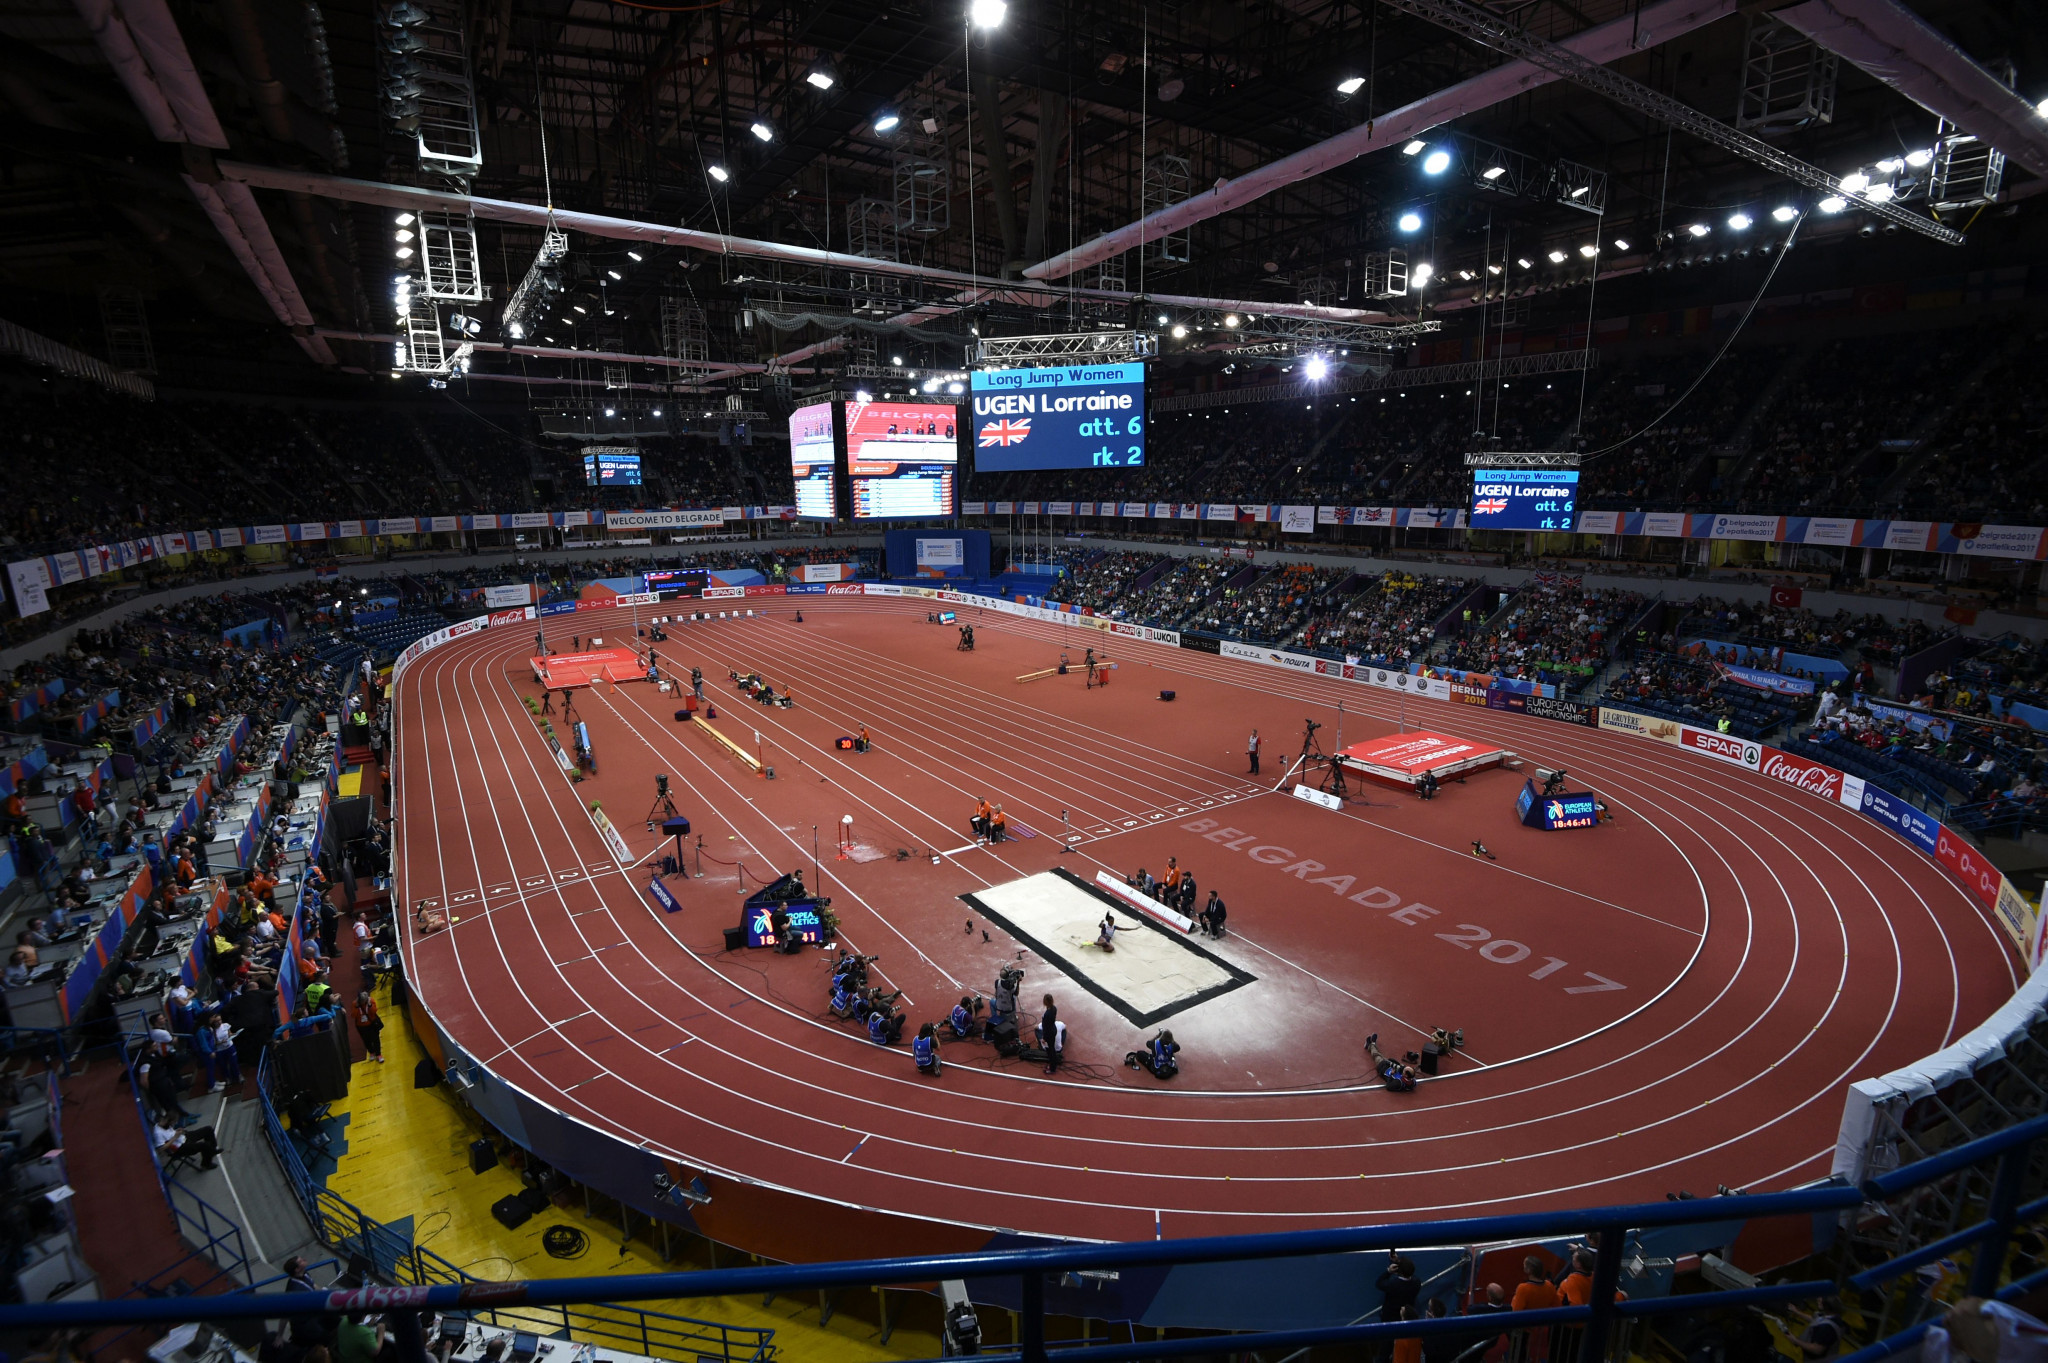 The Štark Arena in Belgrade is set to host the World Athletics Indoor Championships from March 18 to 20 ©Getty Images